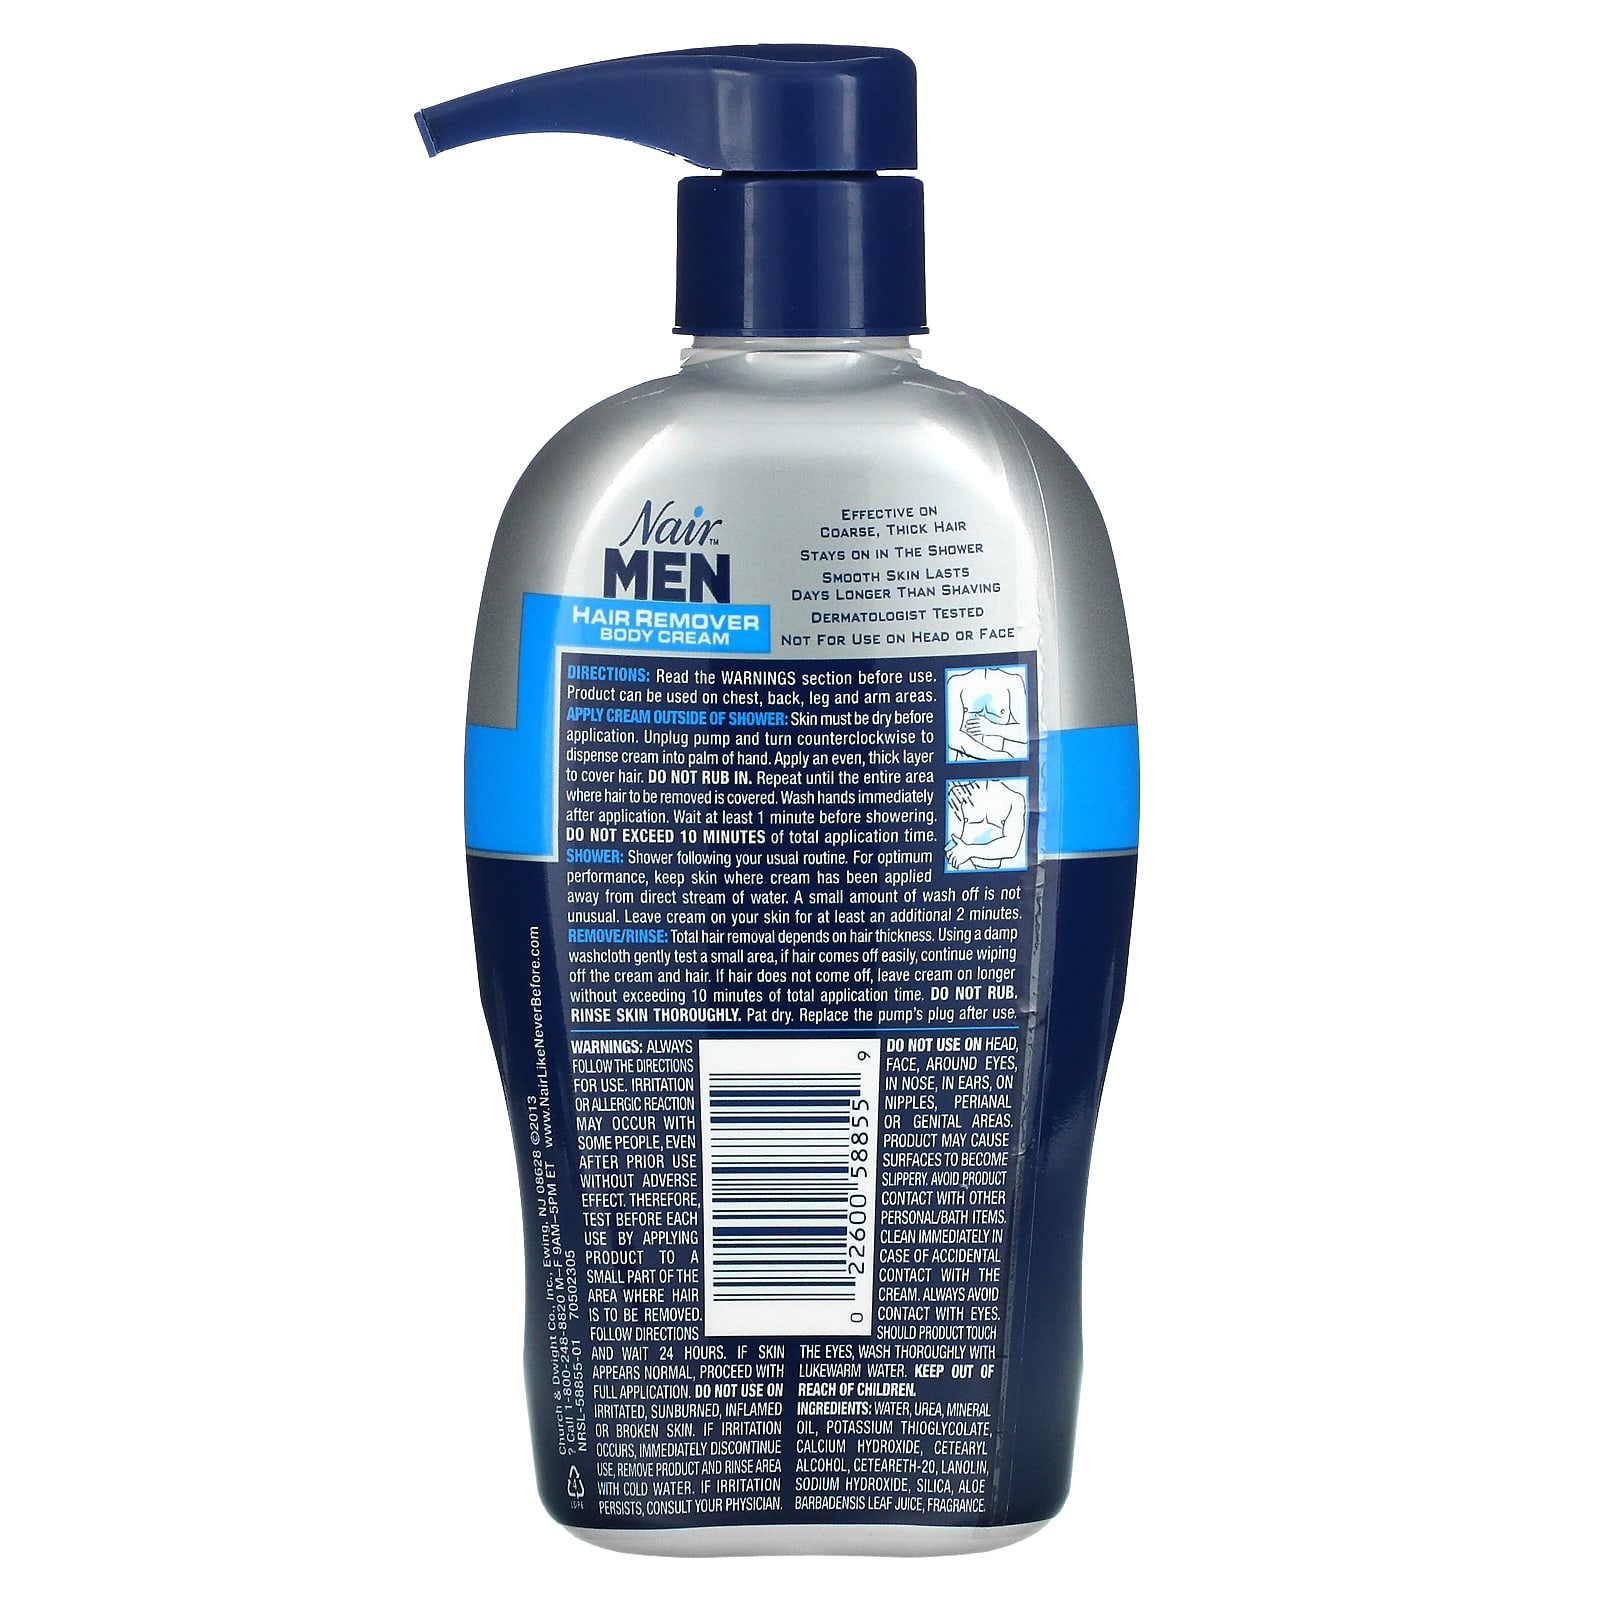 Nair, For Men, Hair Remover Body Cream, Back, Chest, Arms and Legs, 13 oz  (368 g)